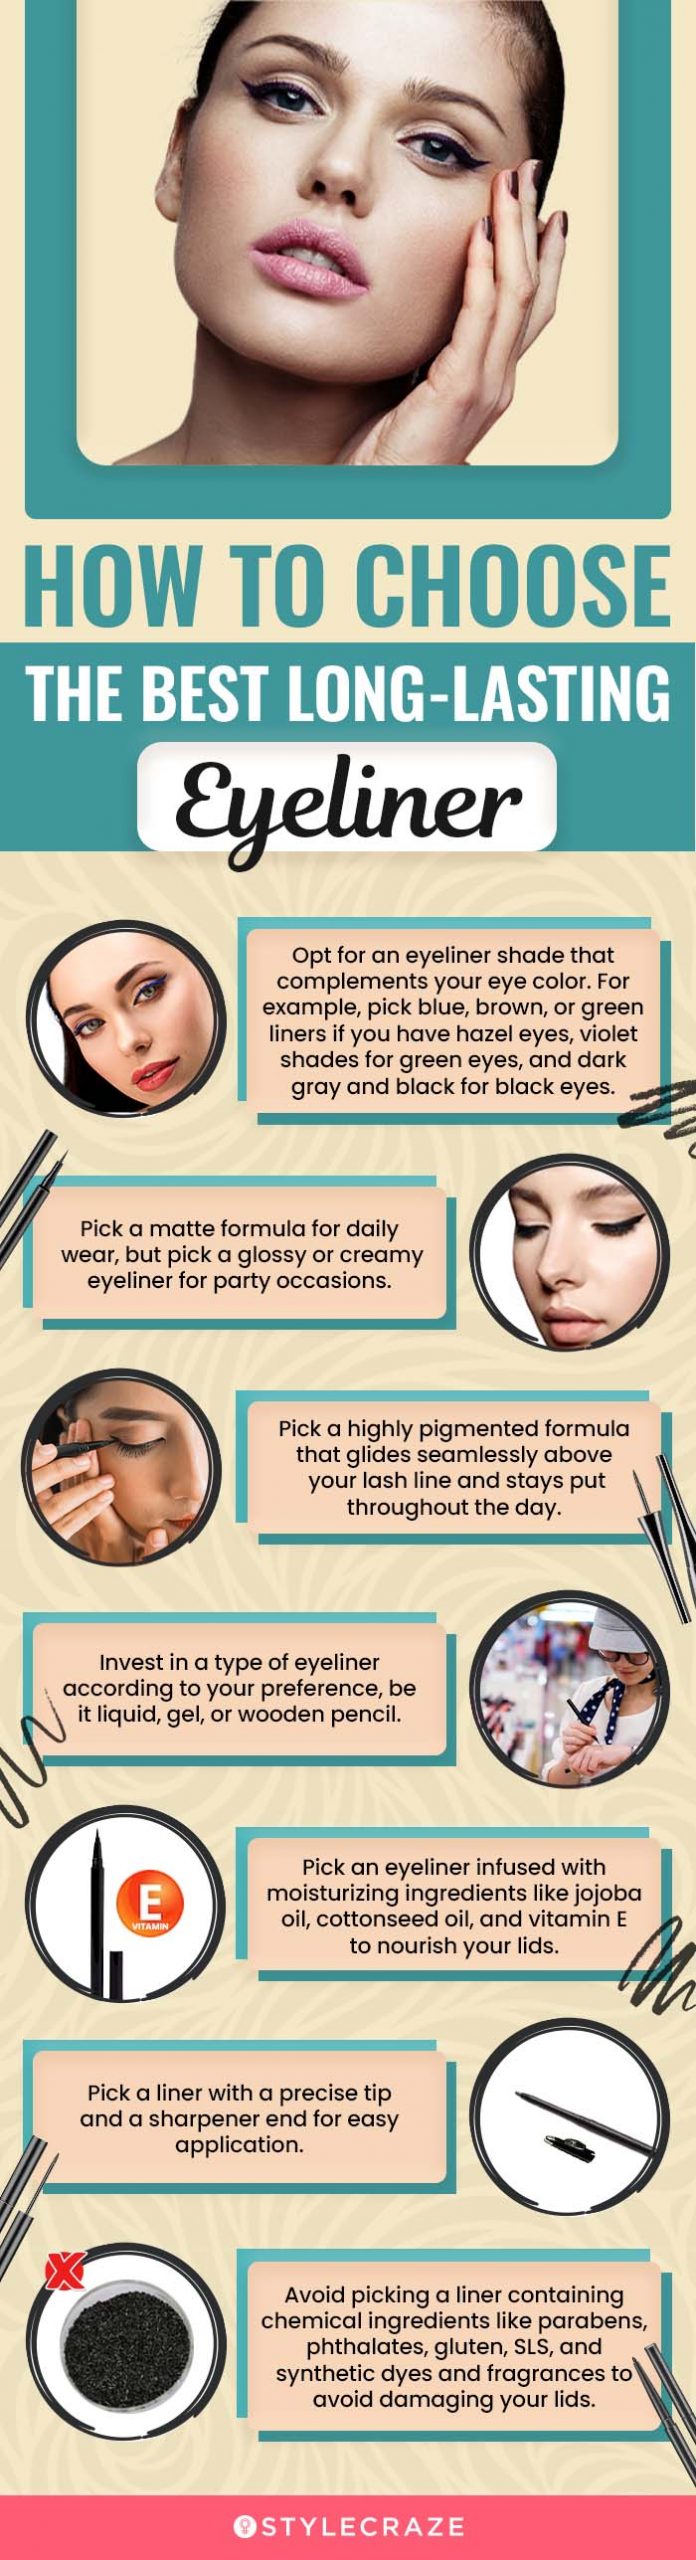 How To Choose The Best Long-Lasting Eyeliner (infographic)